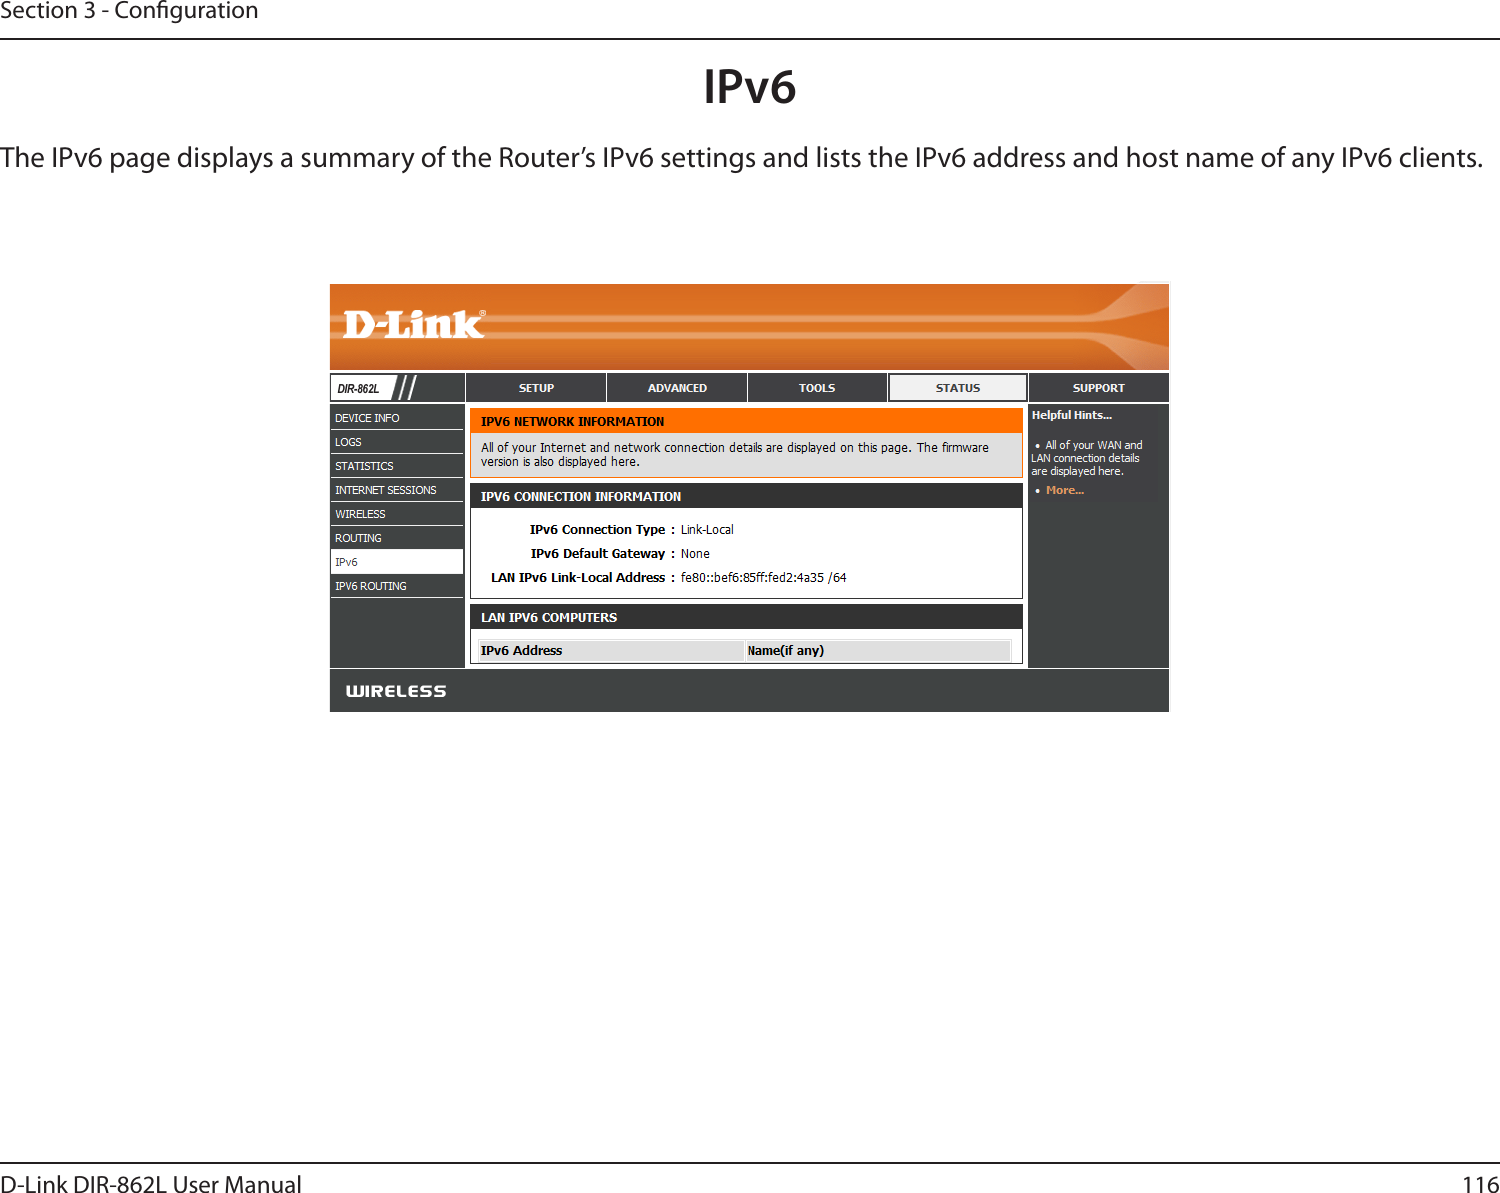 116D-Link DIR-862L User ManualSection 3 - CongurationIPv6The IPv6 page displays a summary of the Router’s IPv6 settings and lists the IPv6 address and host name of any IPv6 clients. DIR-862L